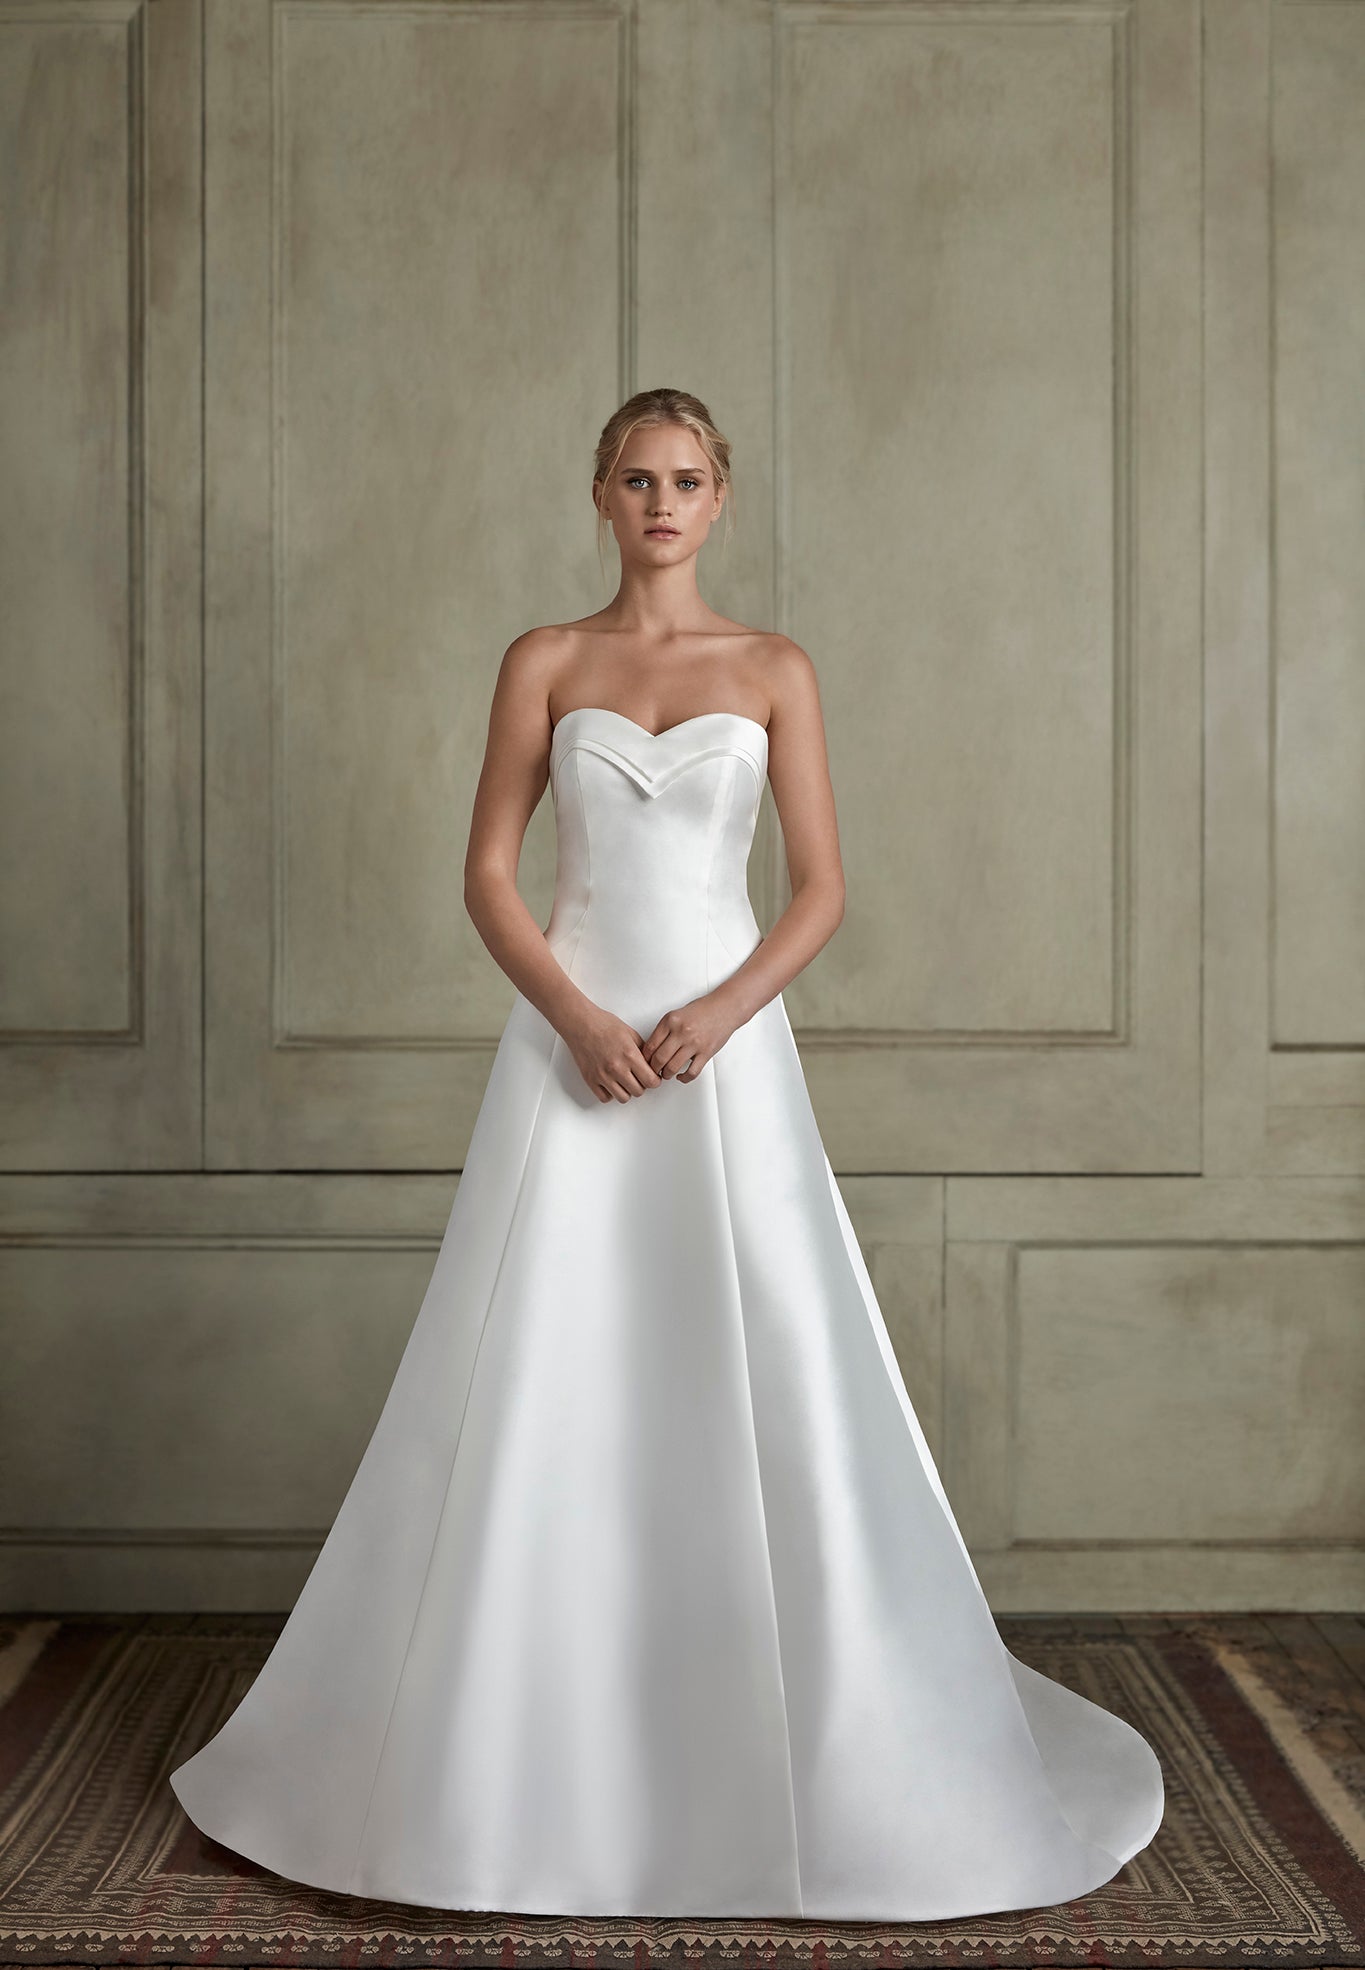 Strapless Sweetheart Fit And Flare Wedding Dress | Kleinfeld Bridal